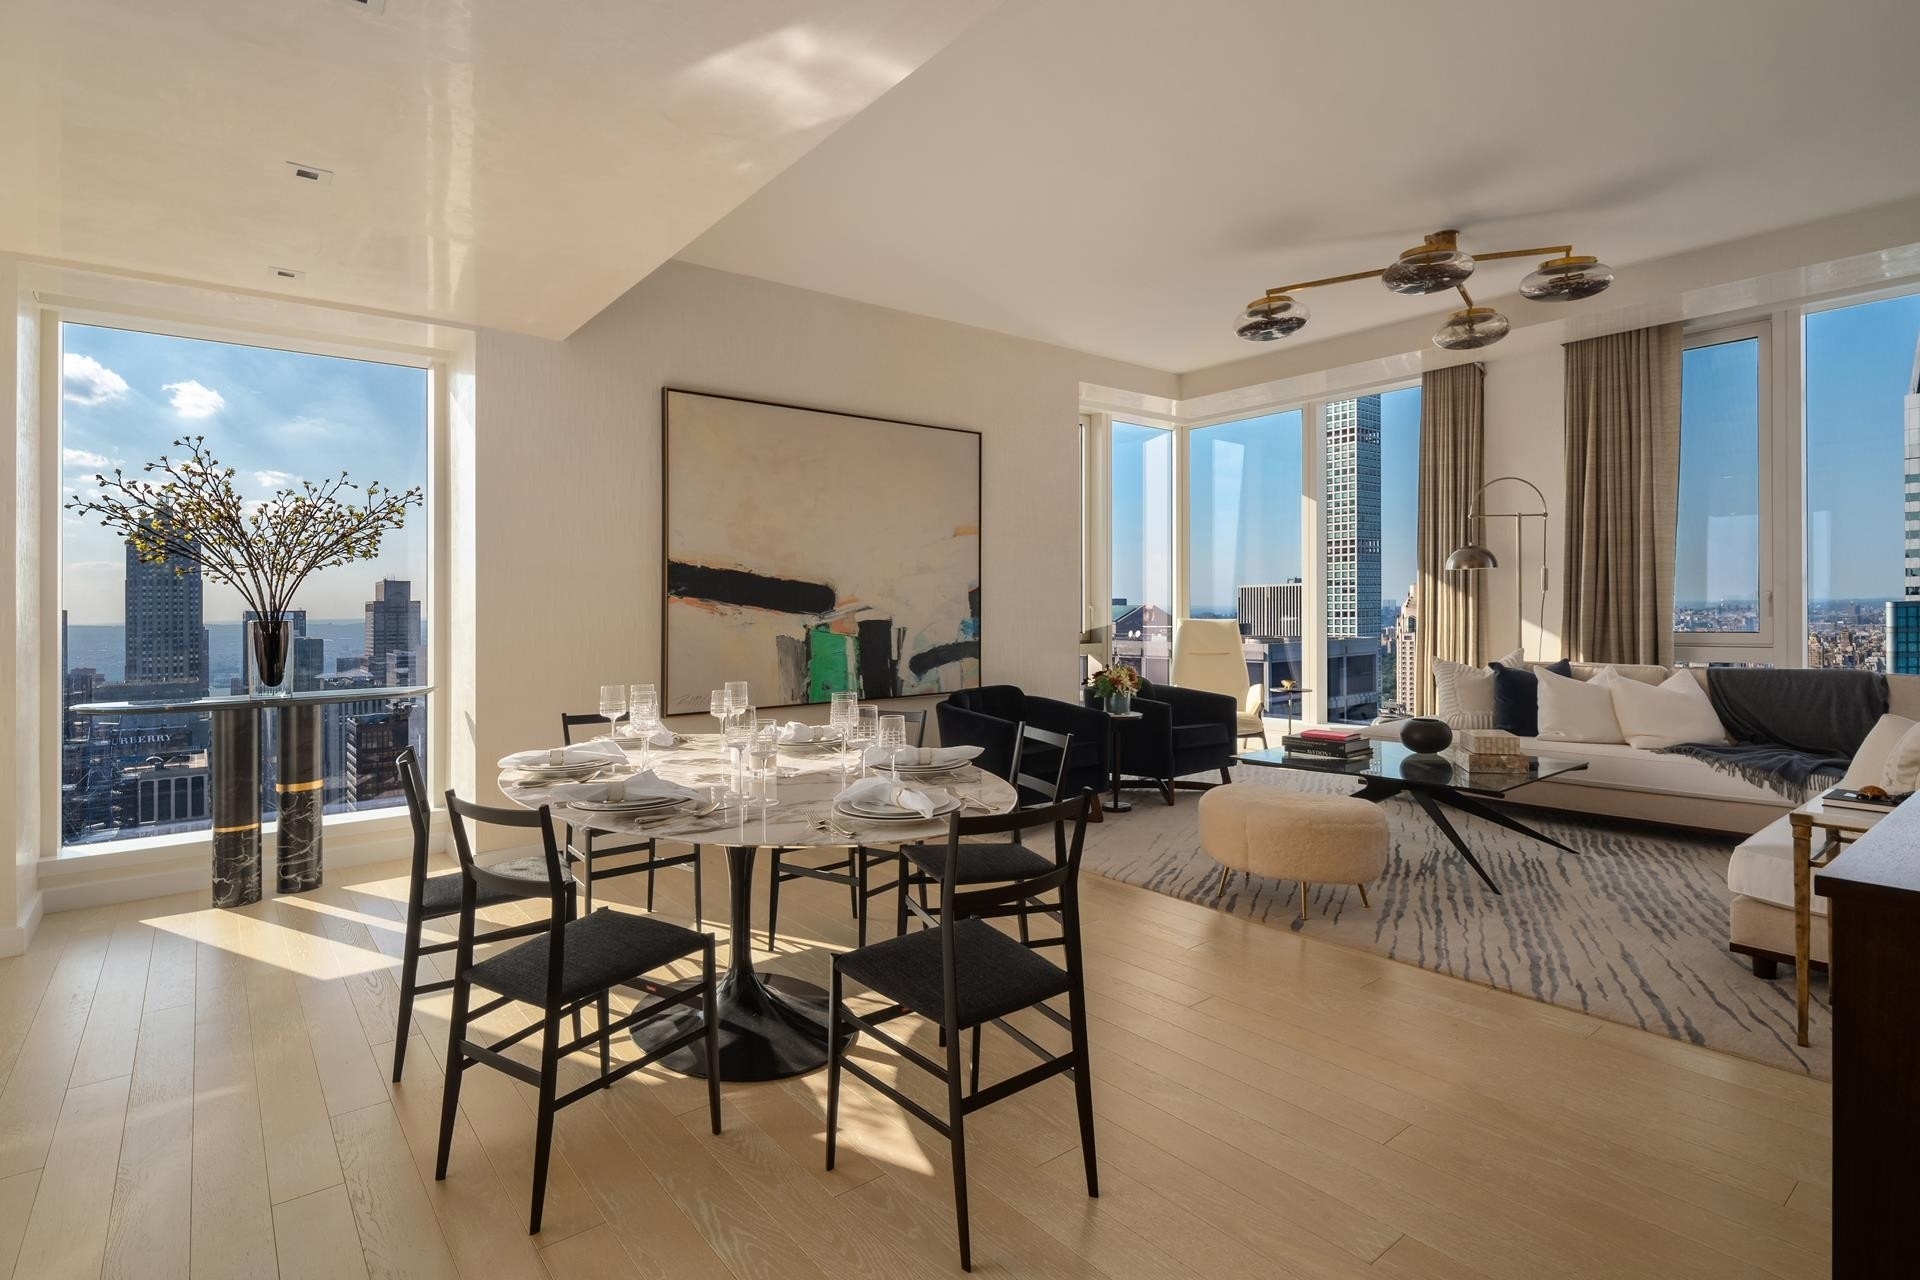 Property at The Centrale, 138 E 50TH ST, 61 Turtle Bay, New York, NY 10022